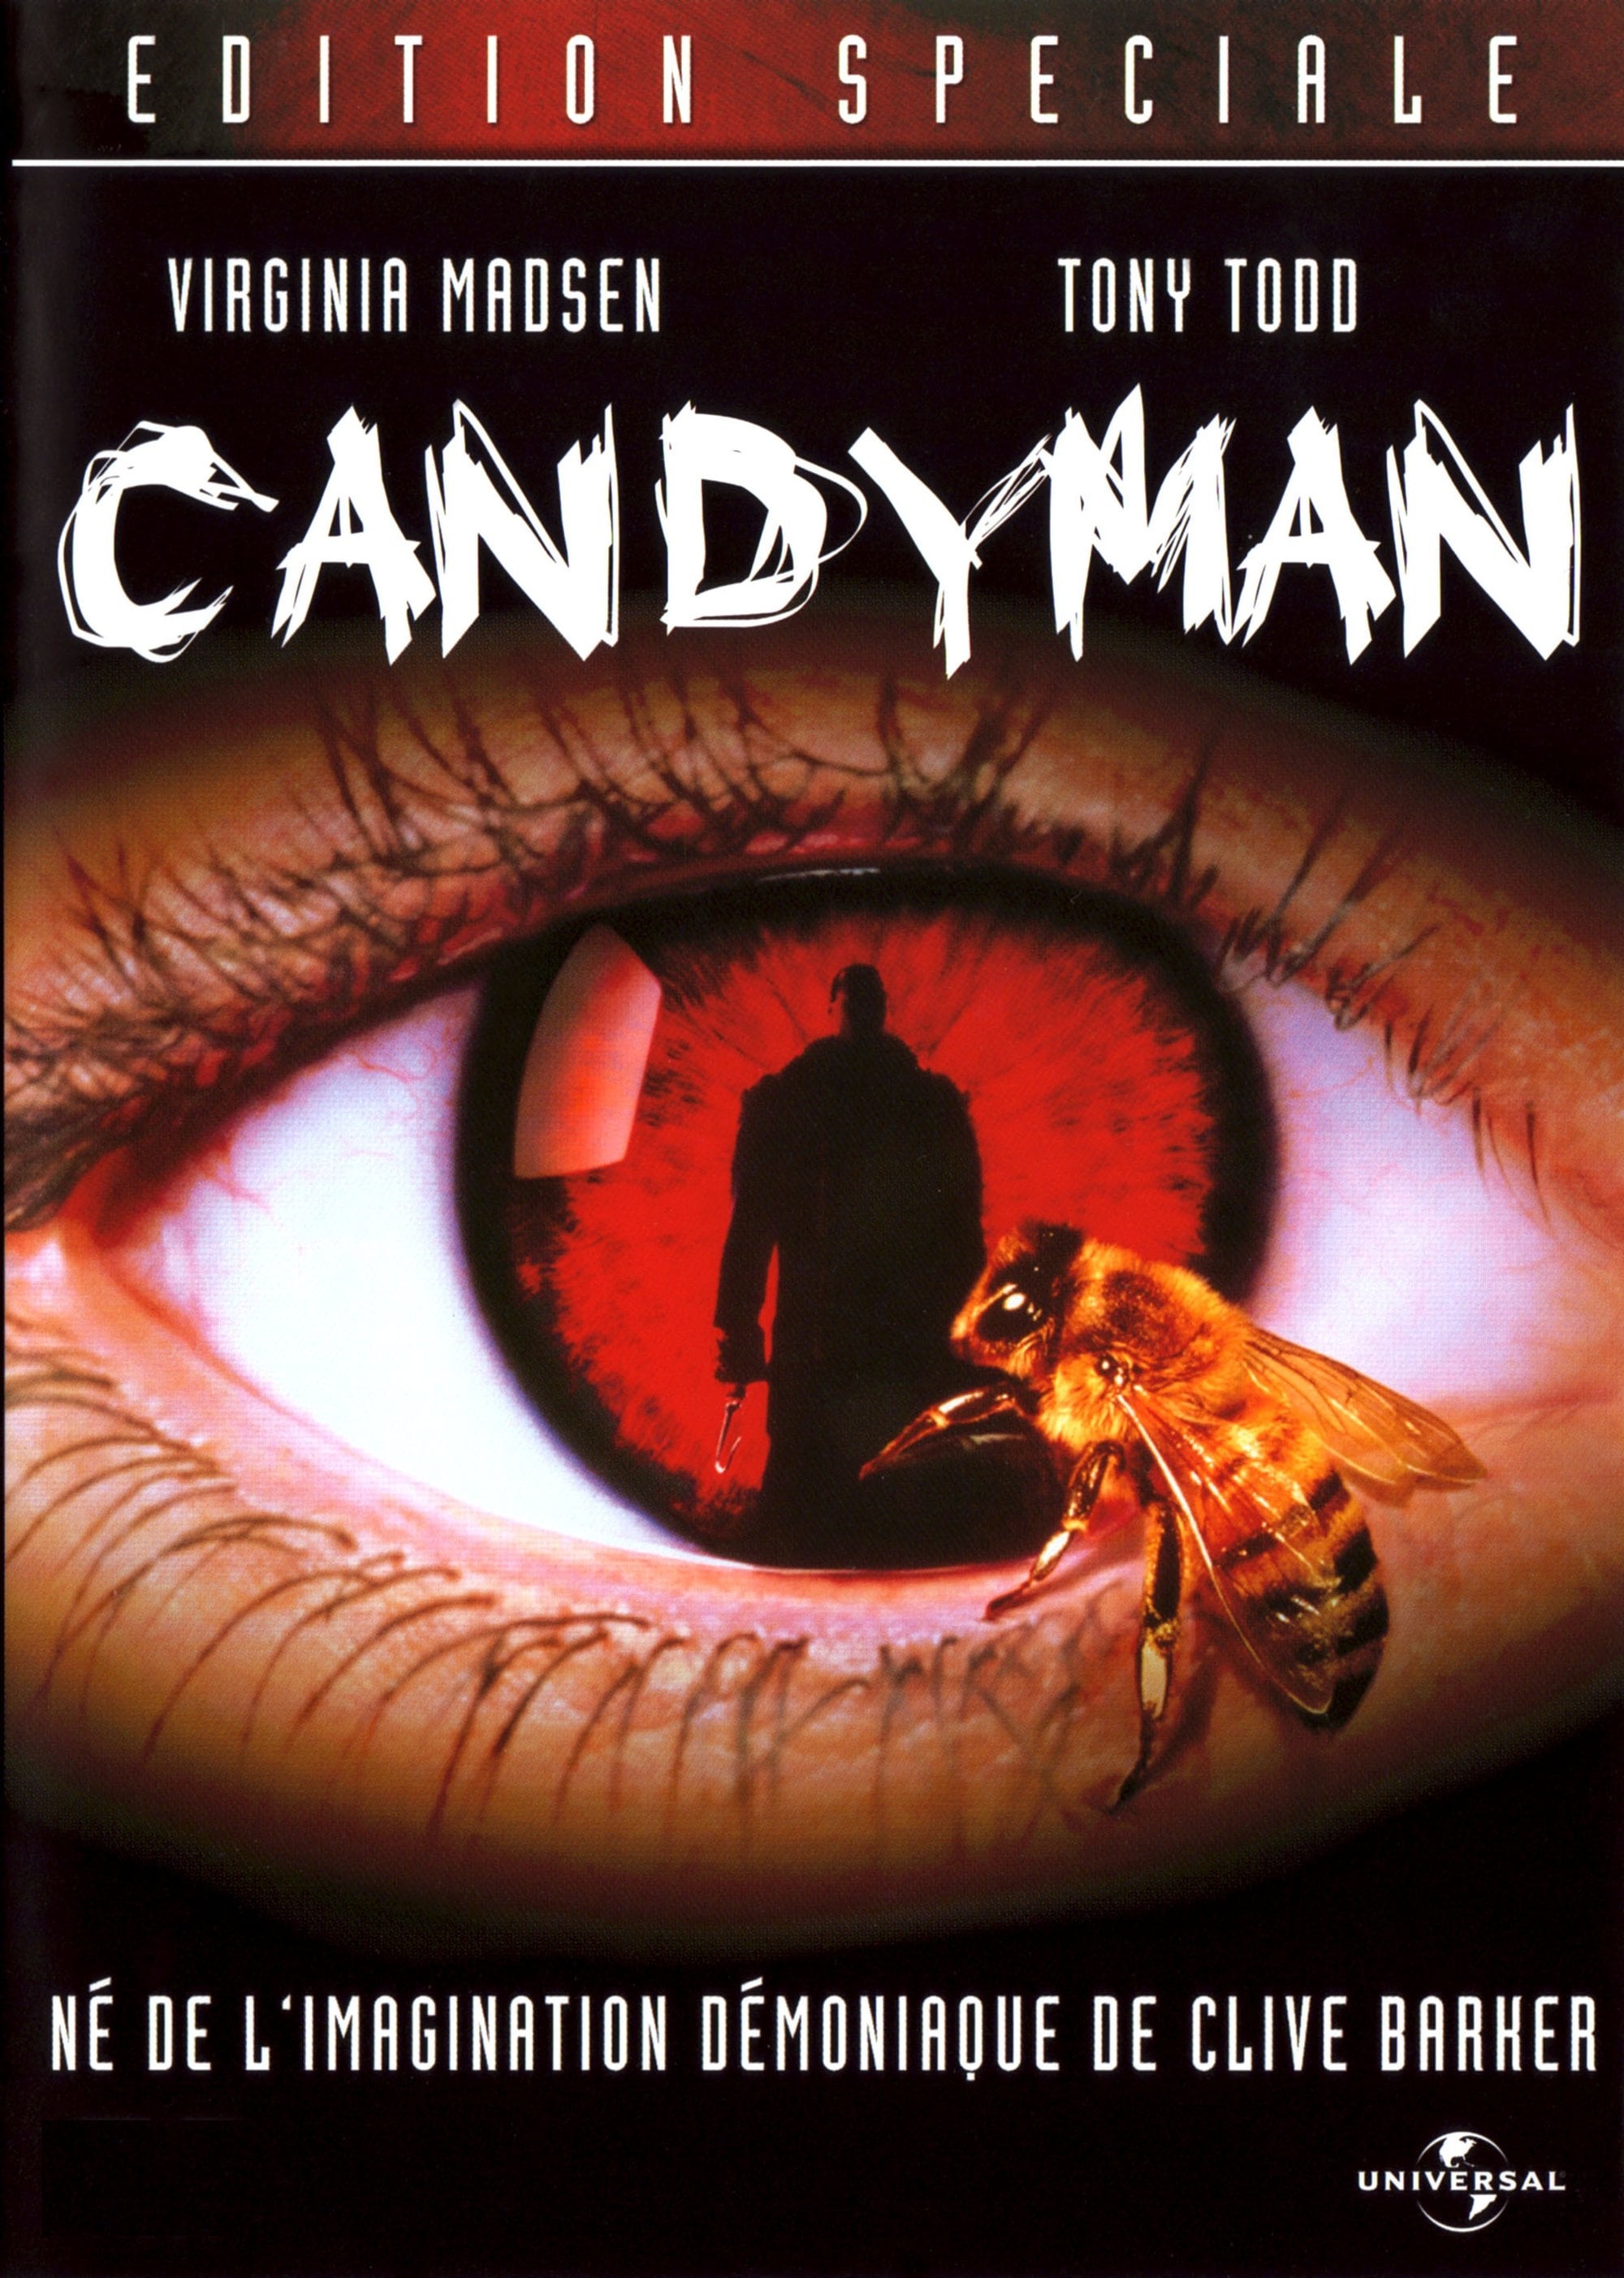 Candyman streaming sur zone telechargement